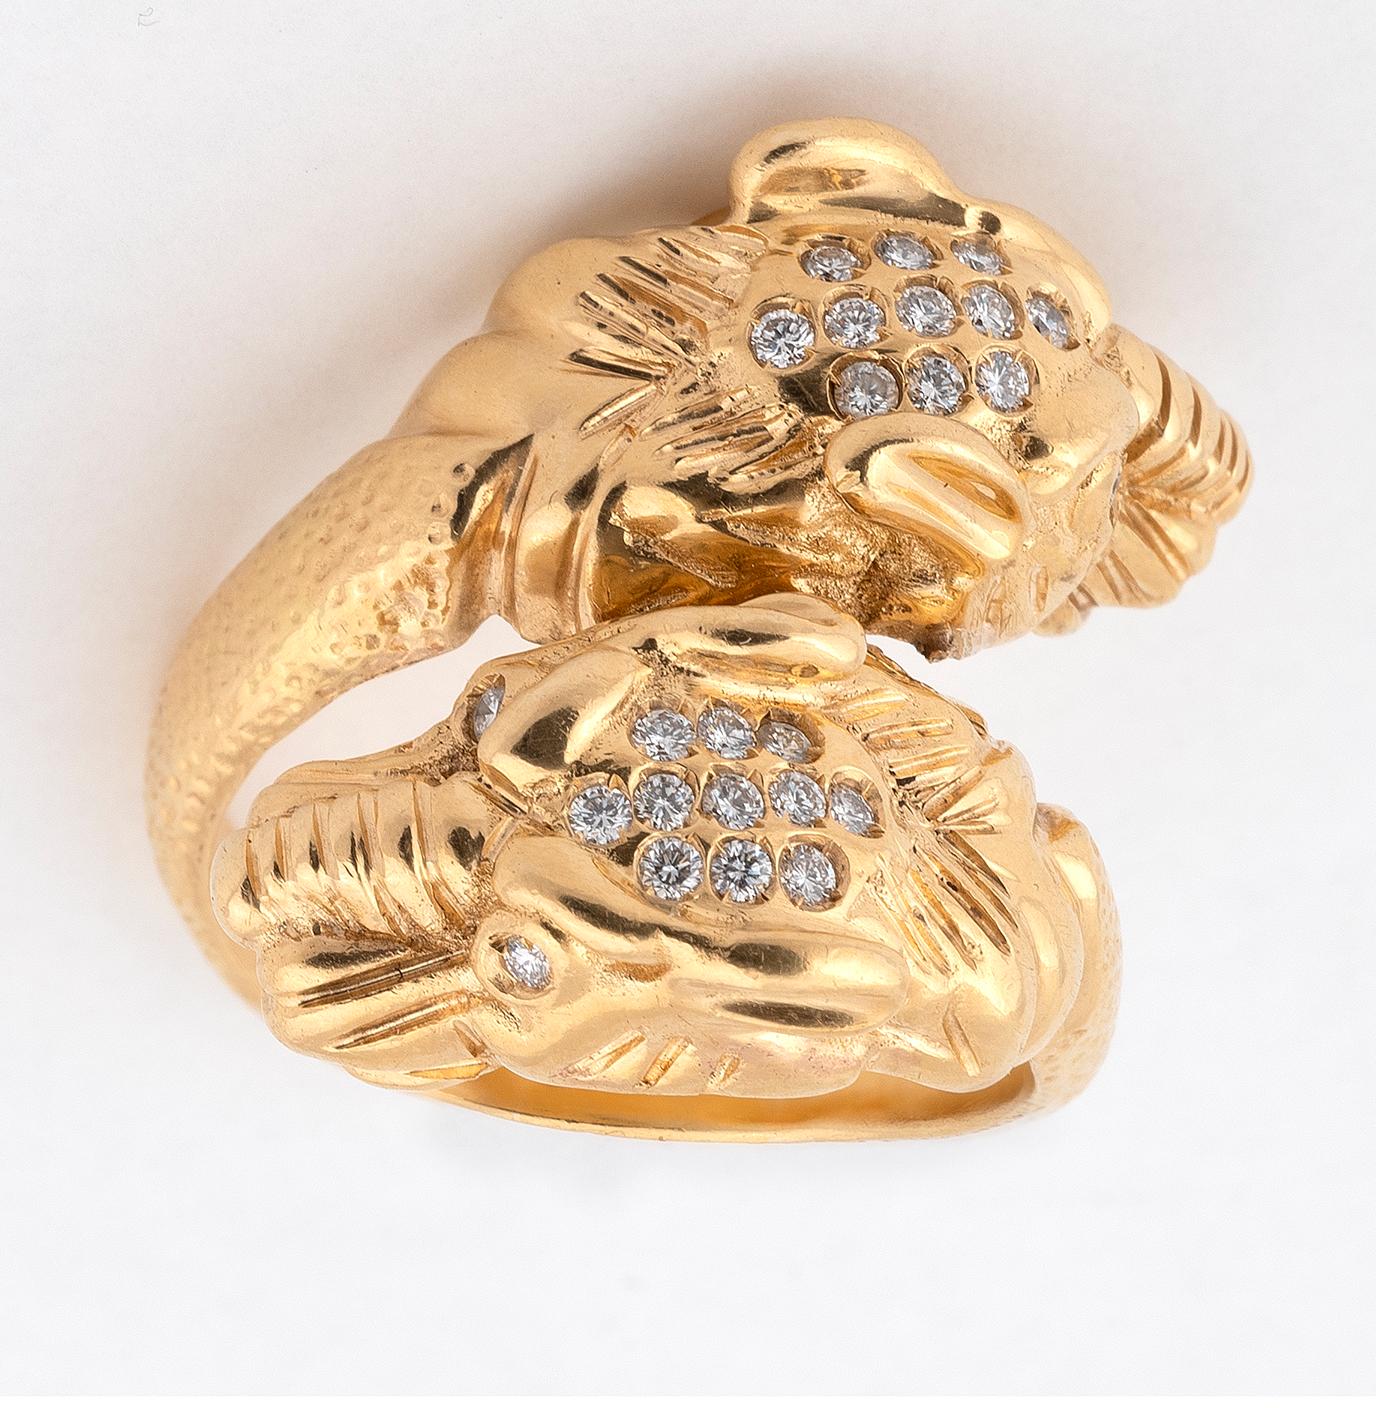 BERNARDO ANTICHITÀ PONTE VECCHIO FLORENCE
Designed as two tiger with diamond and gold ring
Size 10
Weight : 31.6gr